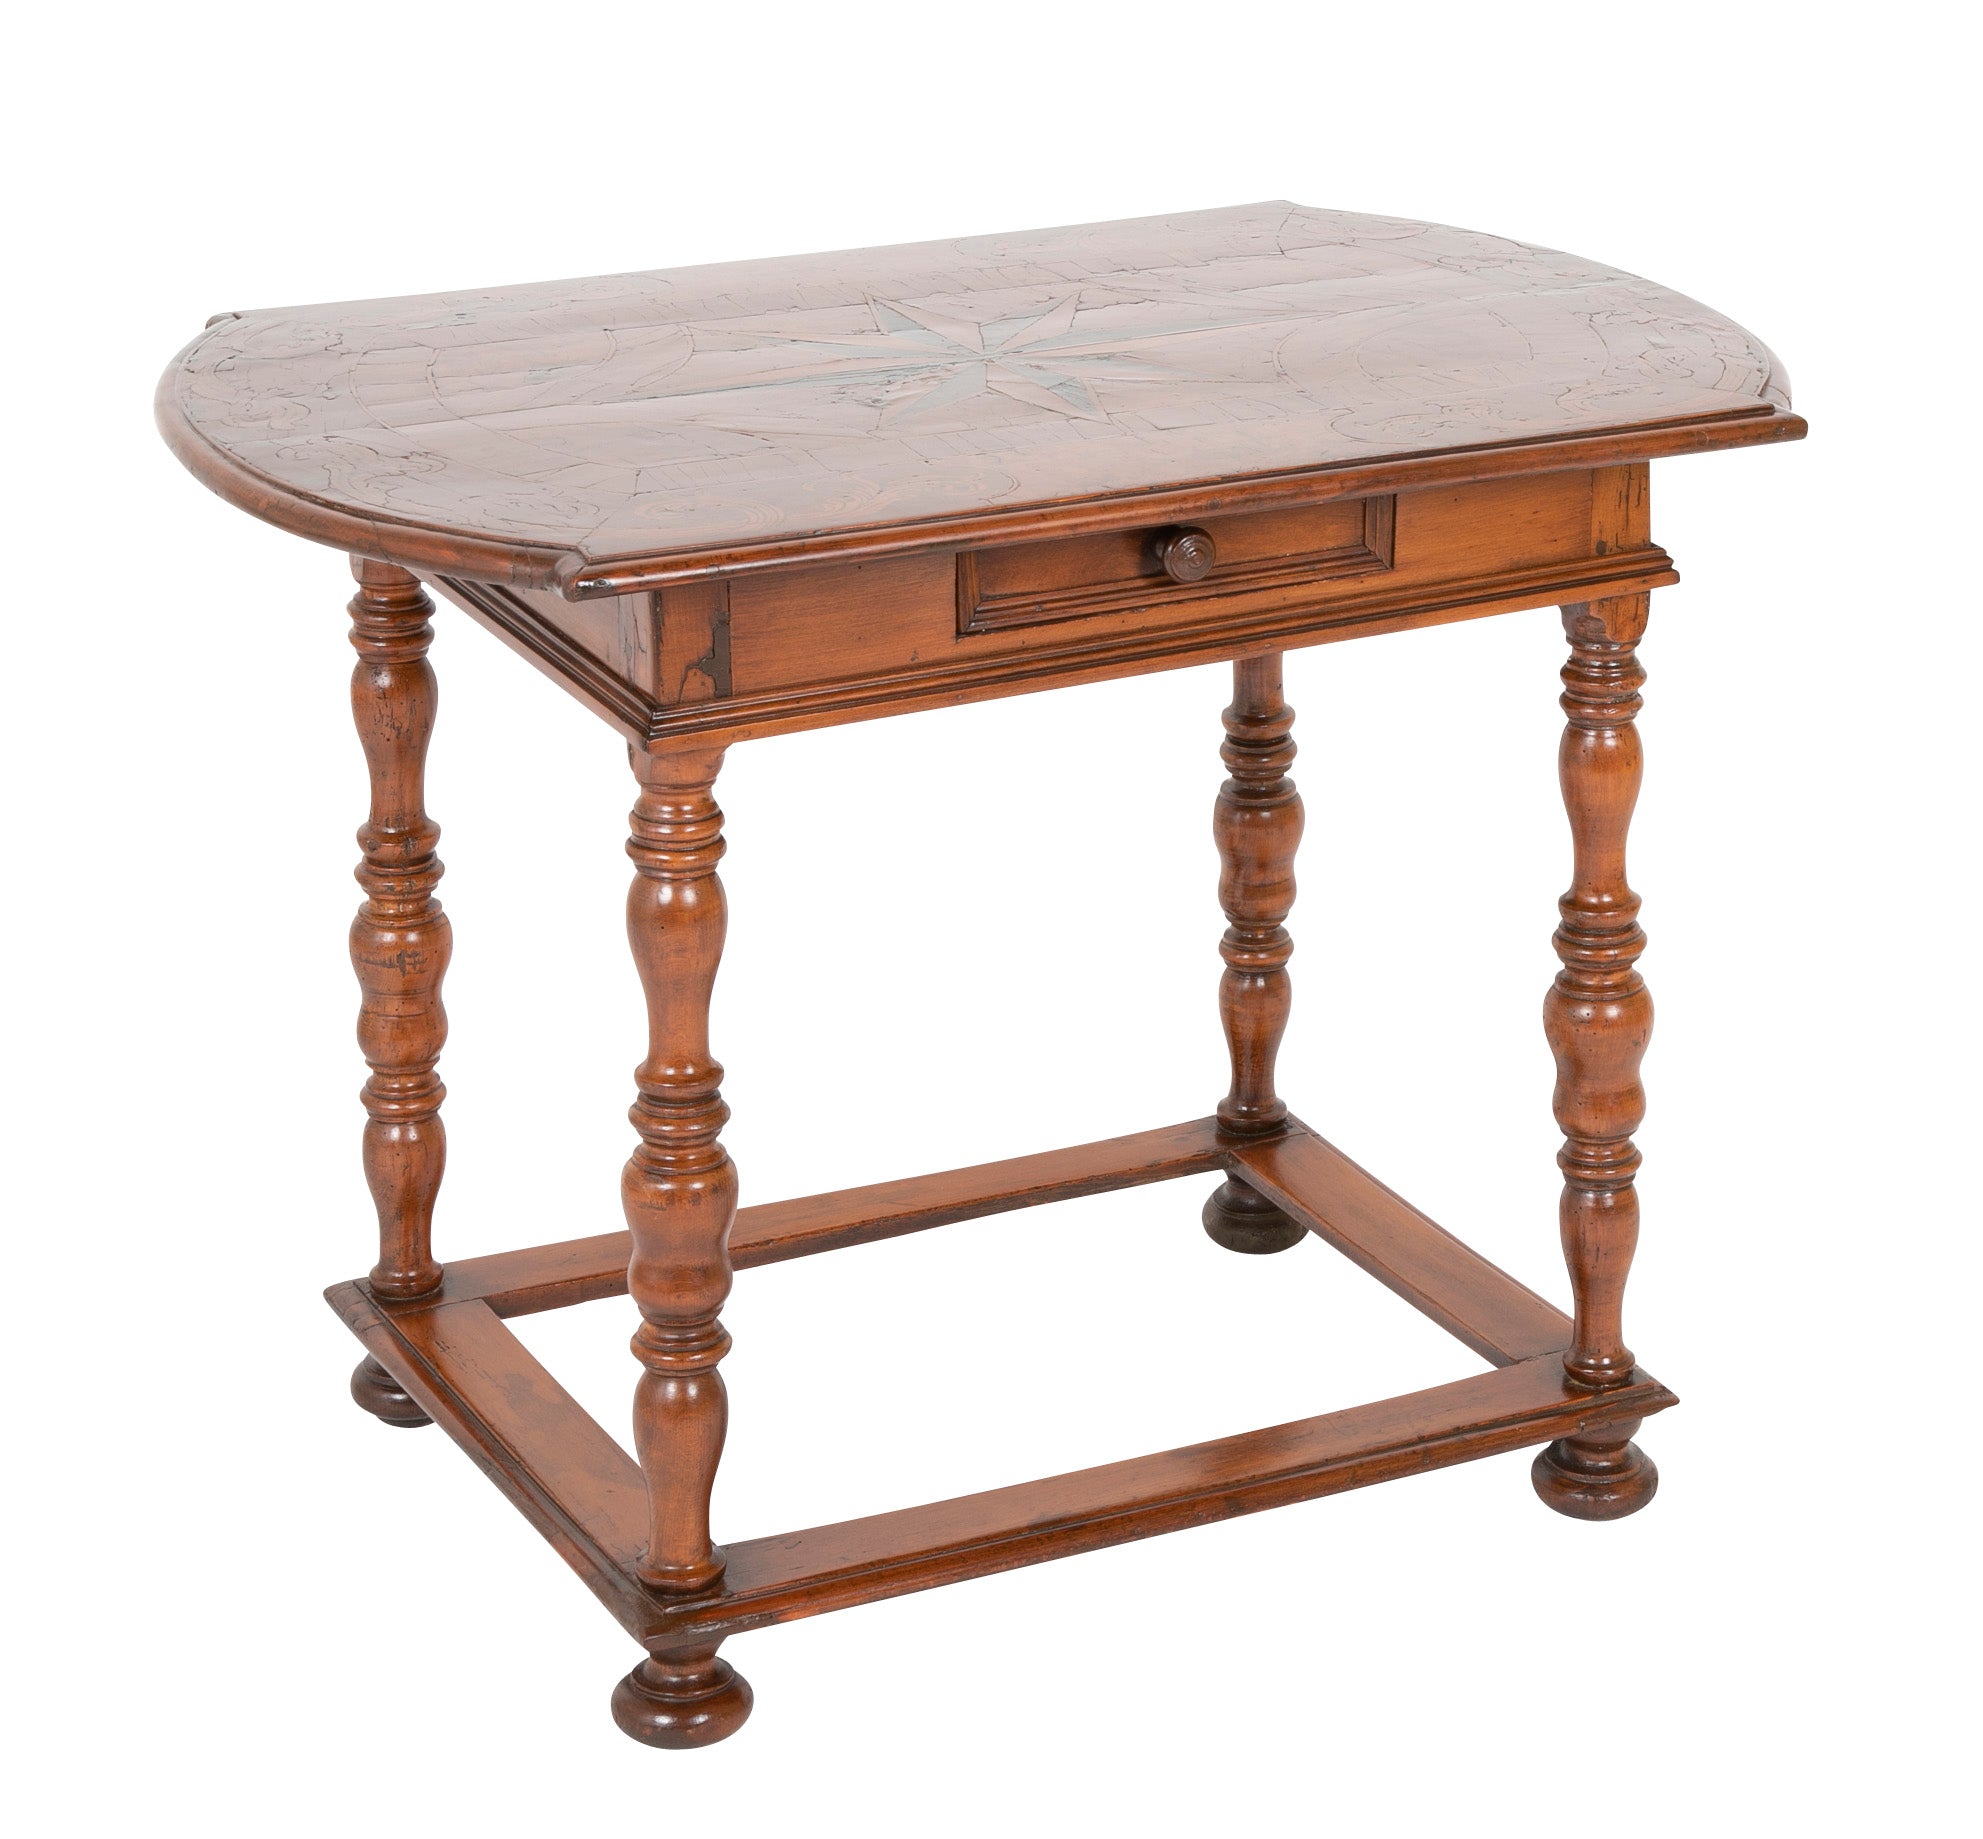 Very Early 18th Century Continental Walnut Marquetry Border Side Table